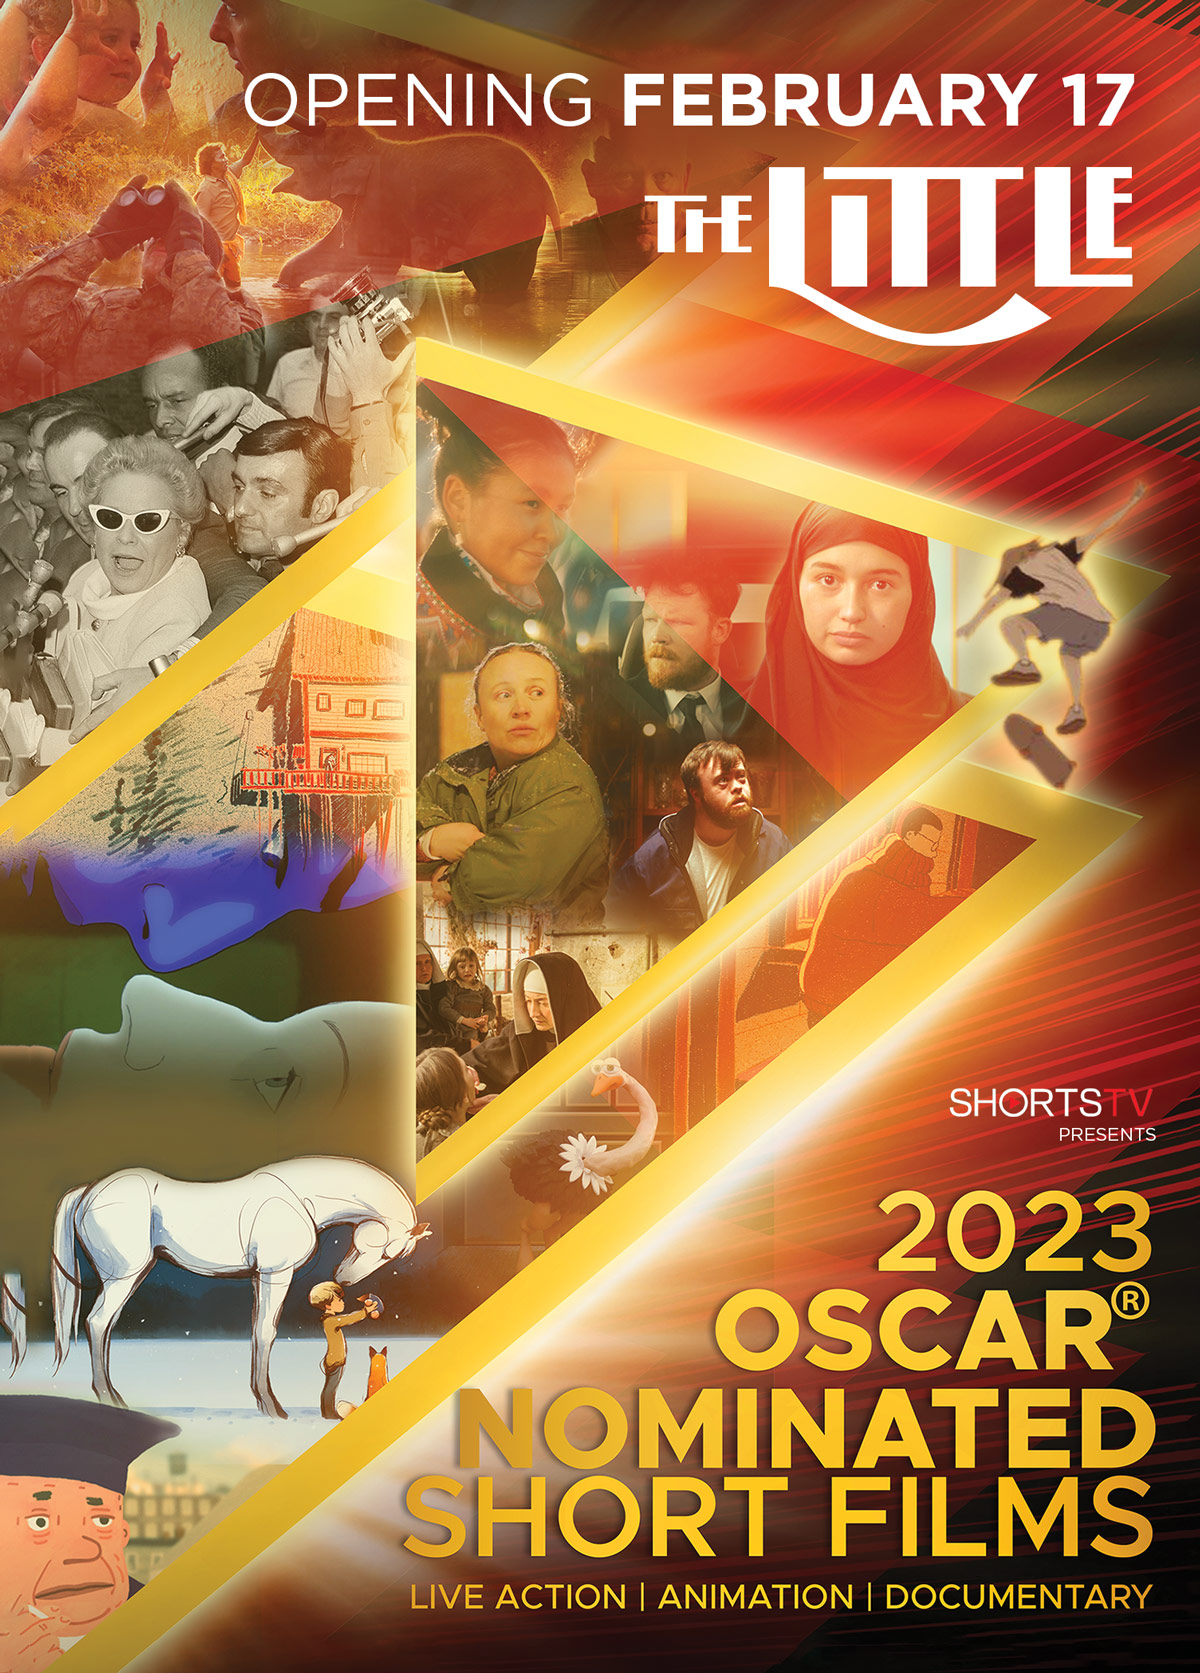 2023 OscarNominated Short Films The Little Theatre